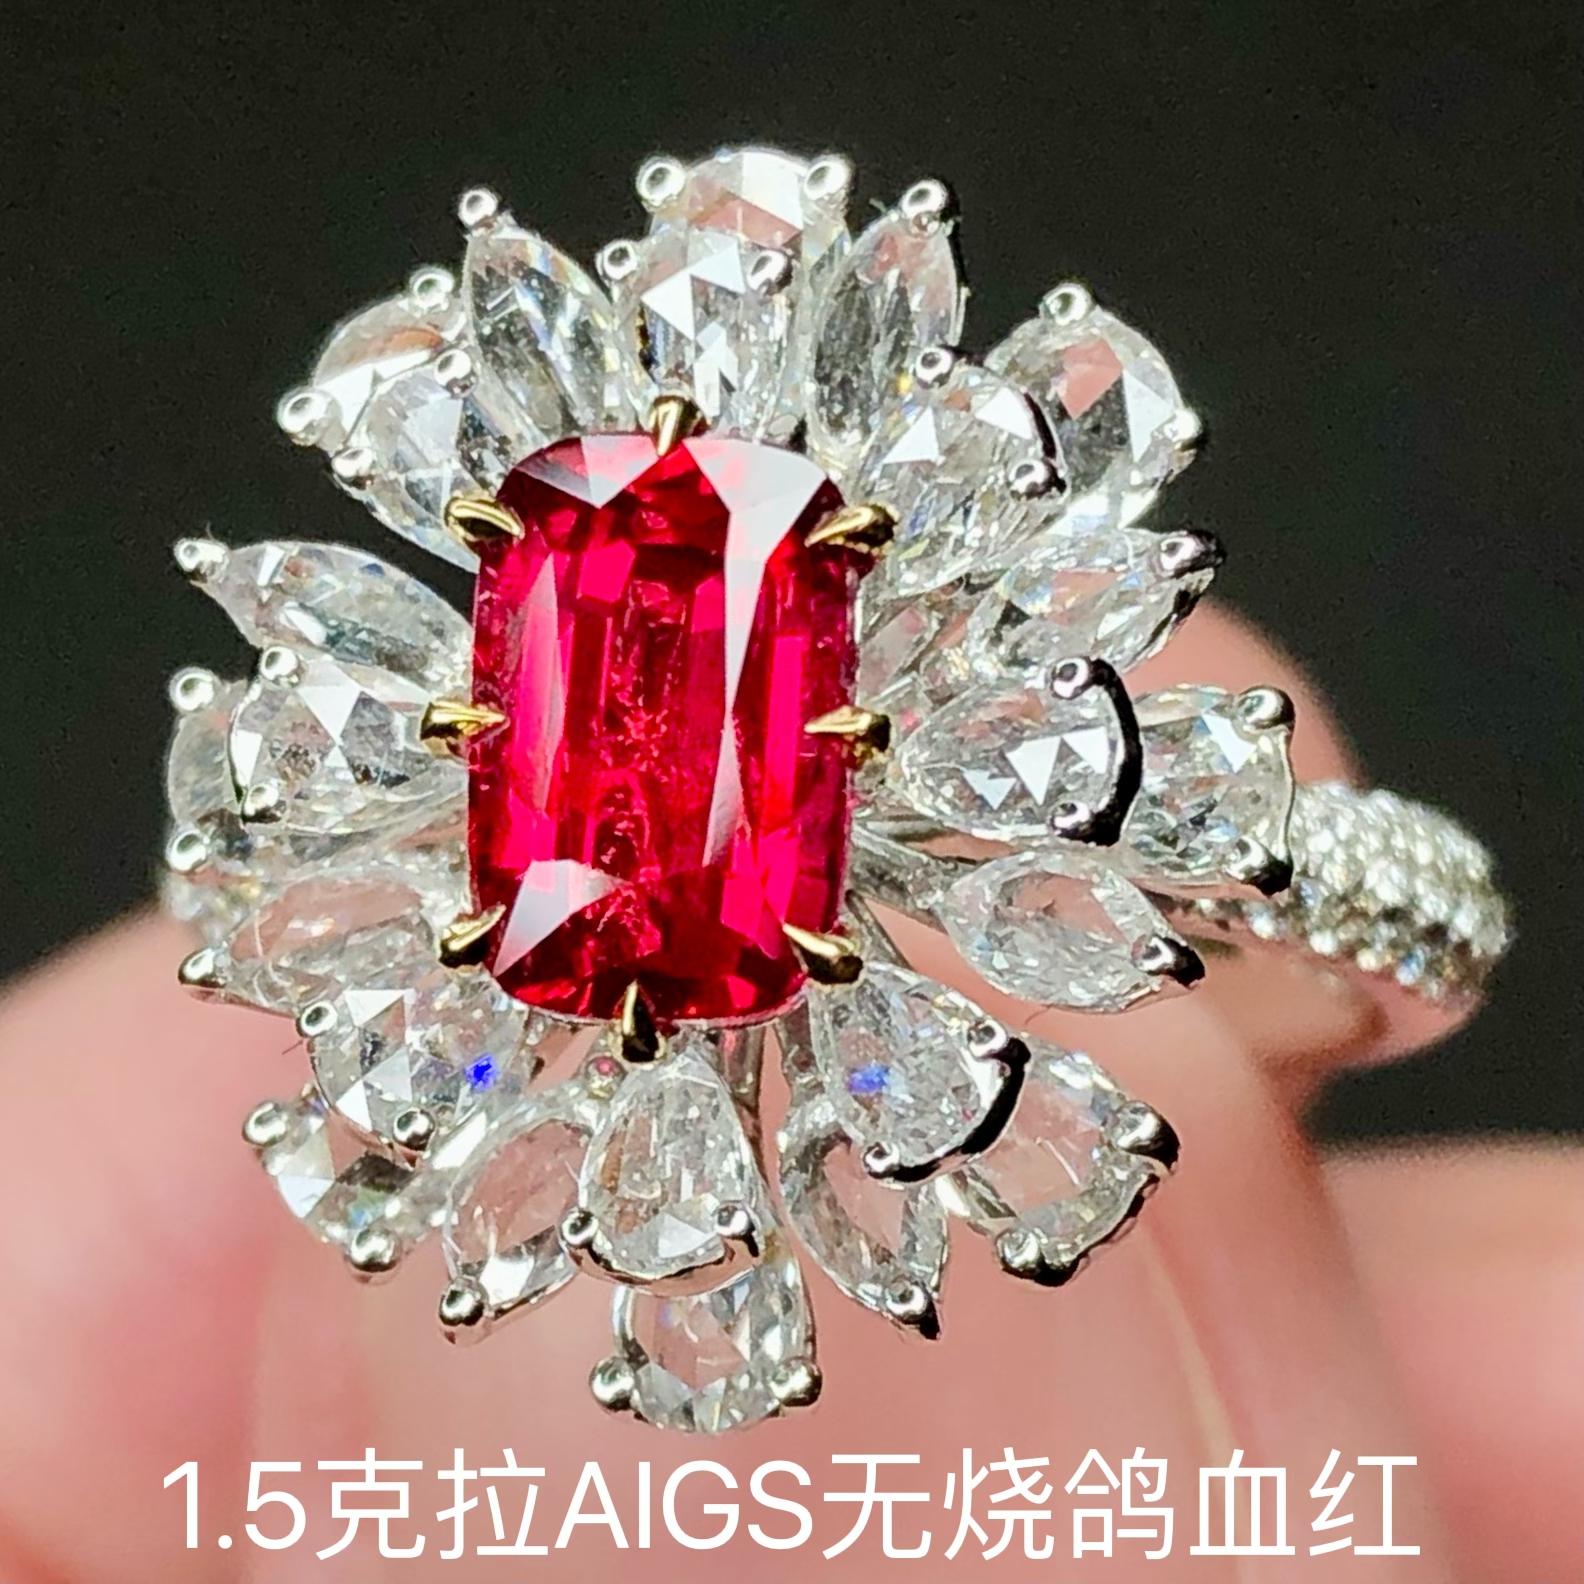 1.53 carats
AIGS Pigeon blood
Unheated Mozambique Ruby
Eye clean
Strong fluorescense
